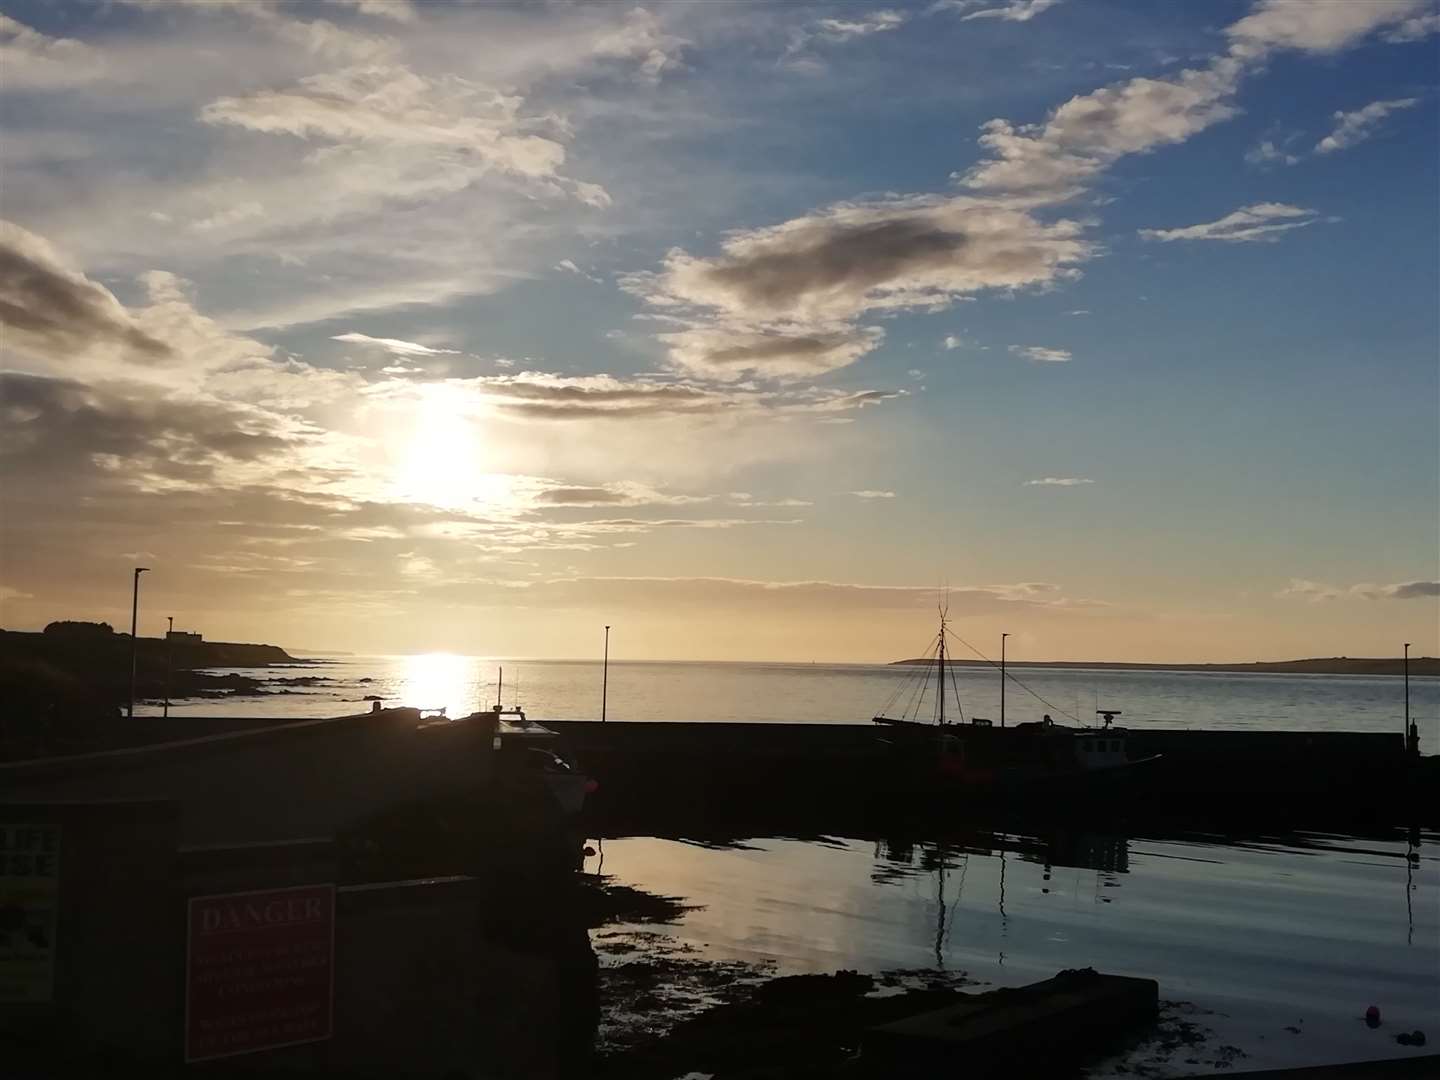 Carole Whittaker took this photo of John O'Groats harbour in the evening sunshine.